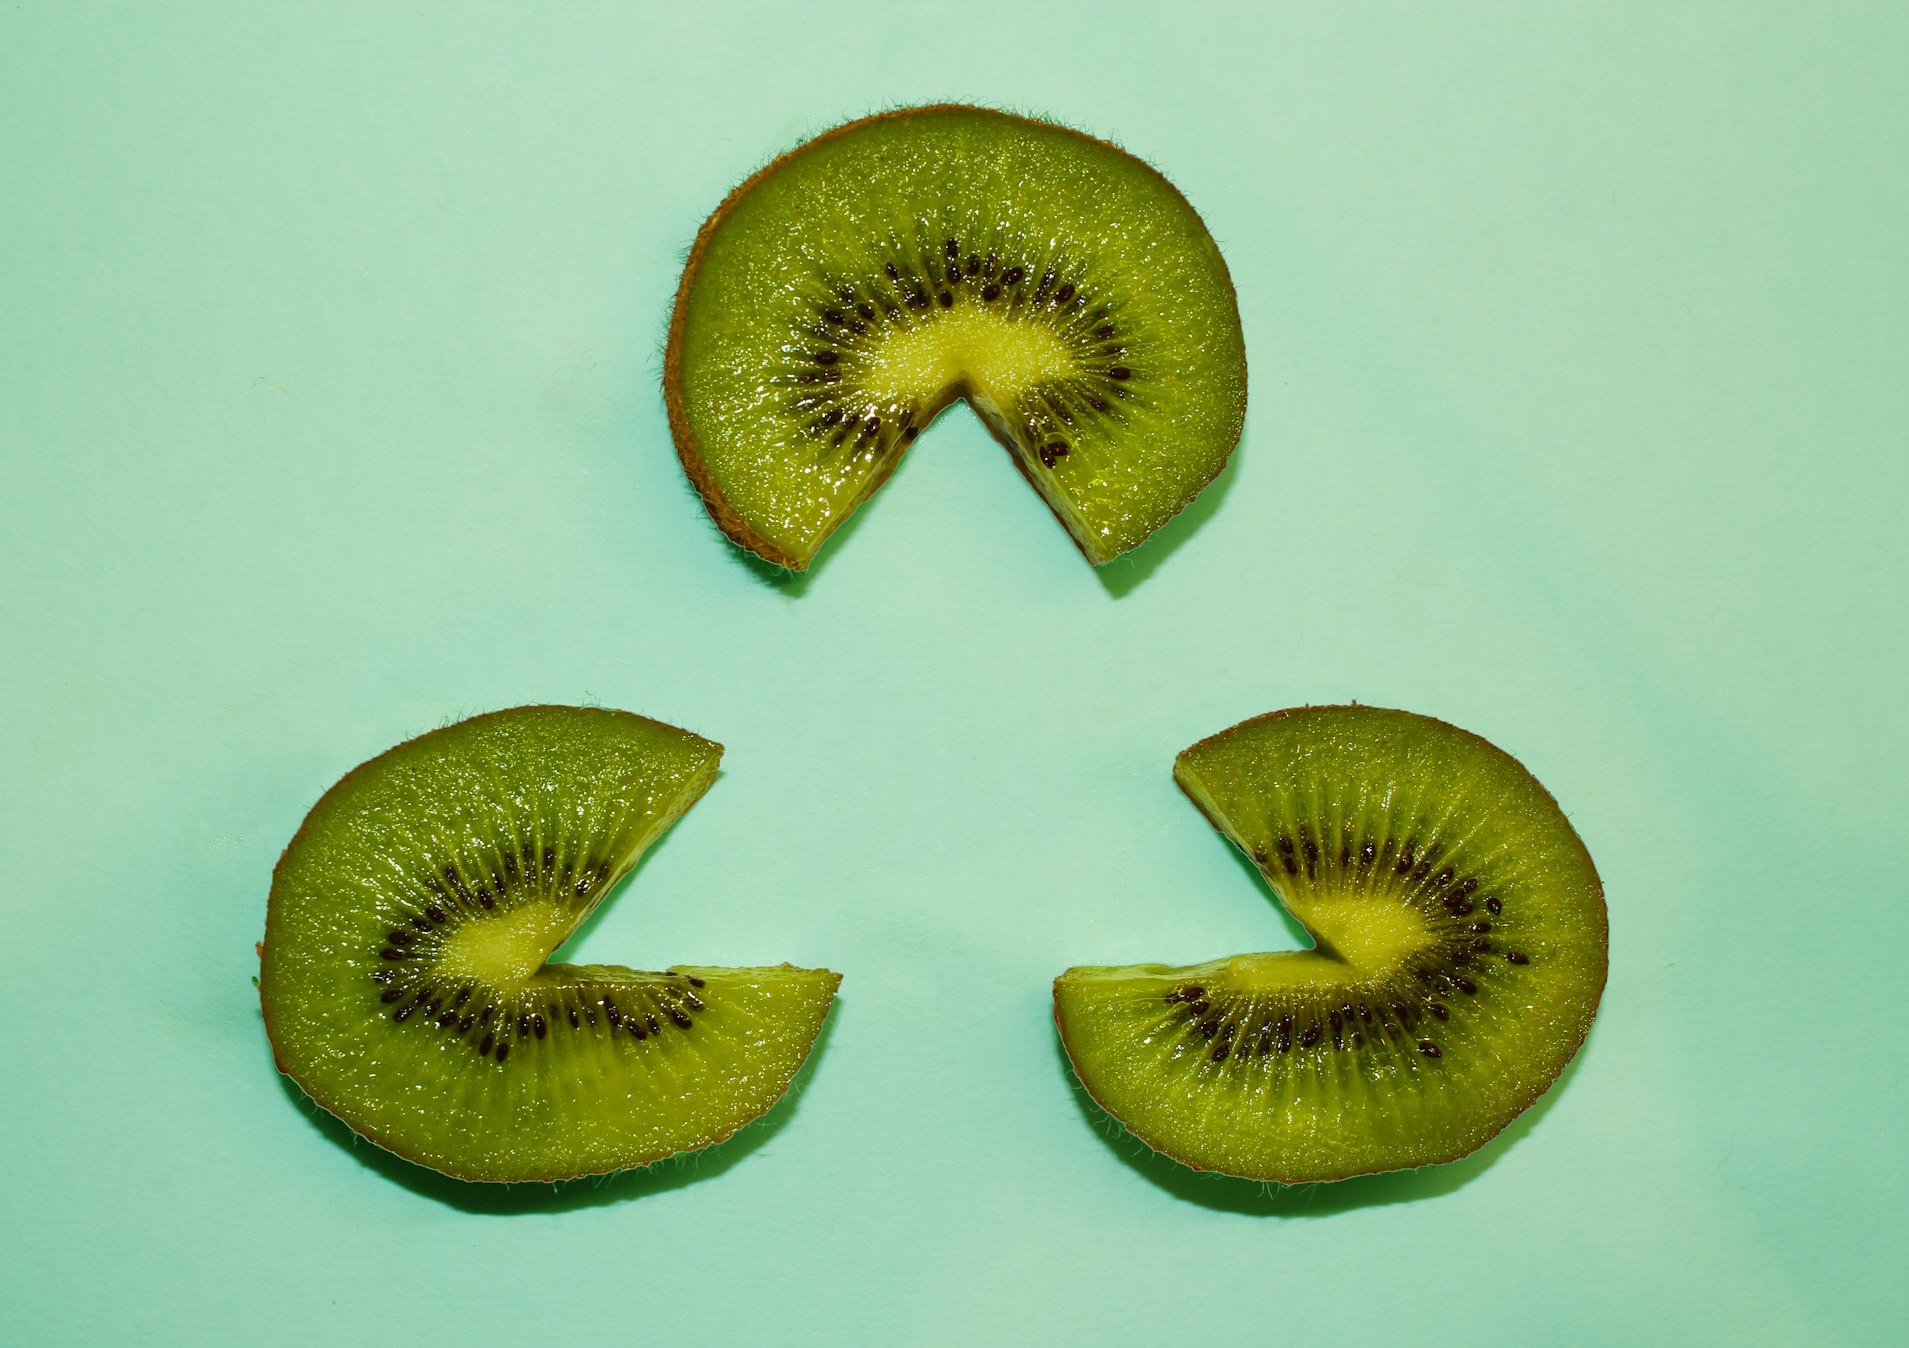 dried kiwis and constipation